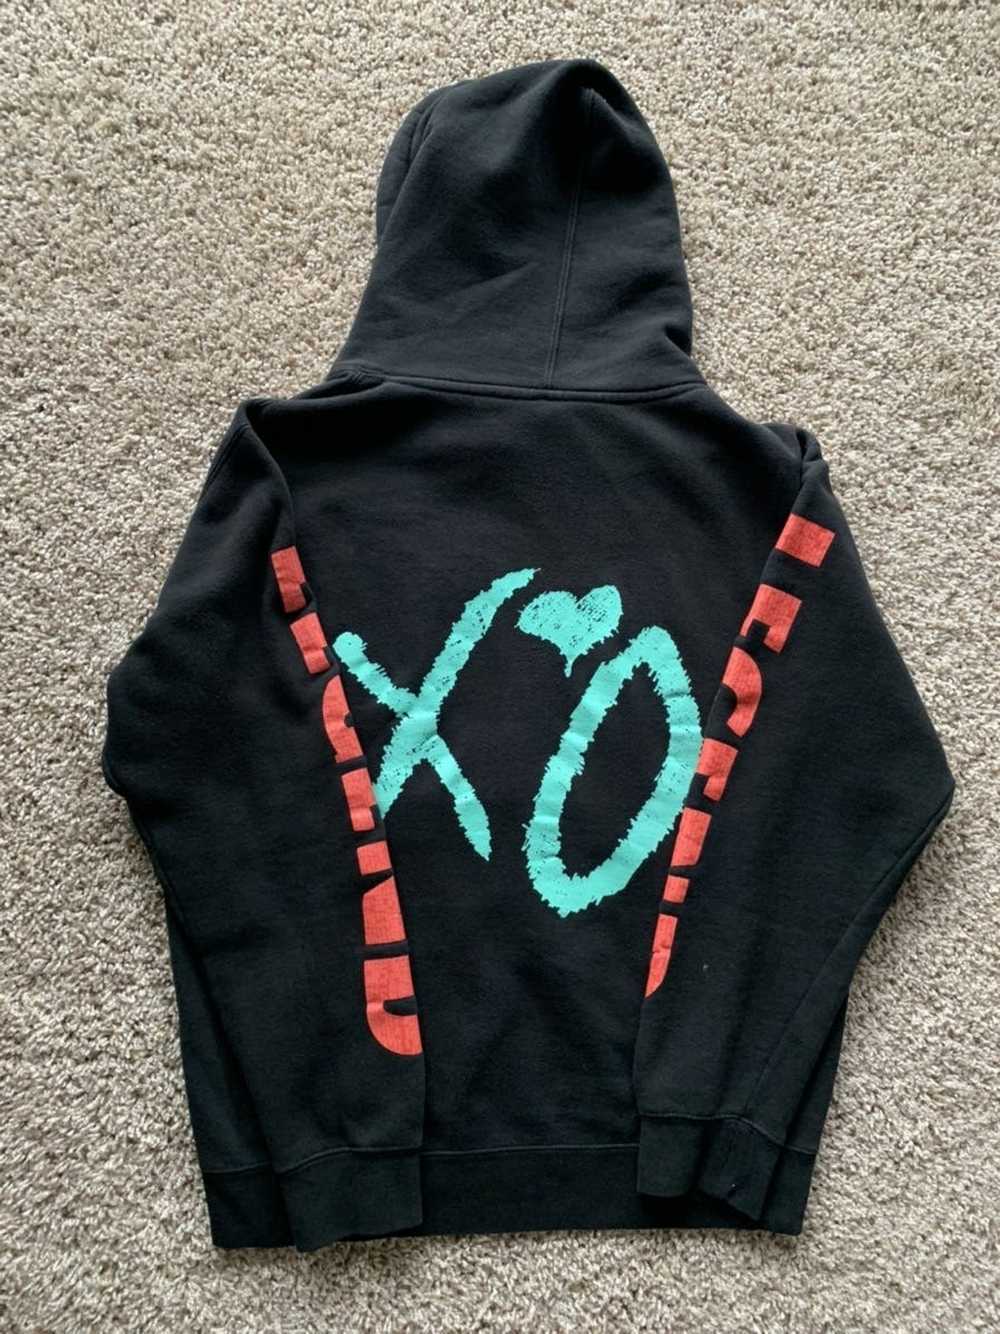 The Weeknd The Weeknd Legend Tour ‘XO’ Hoodie - image 5